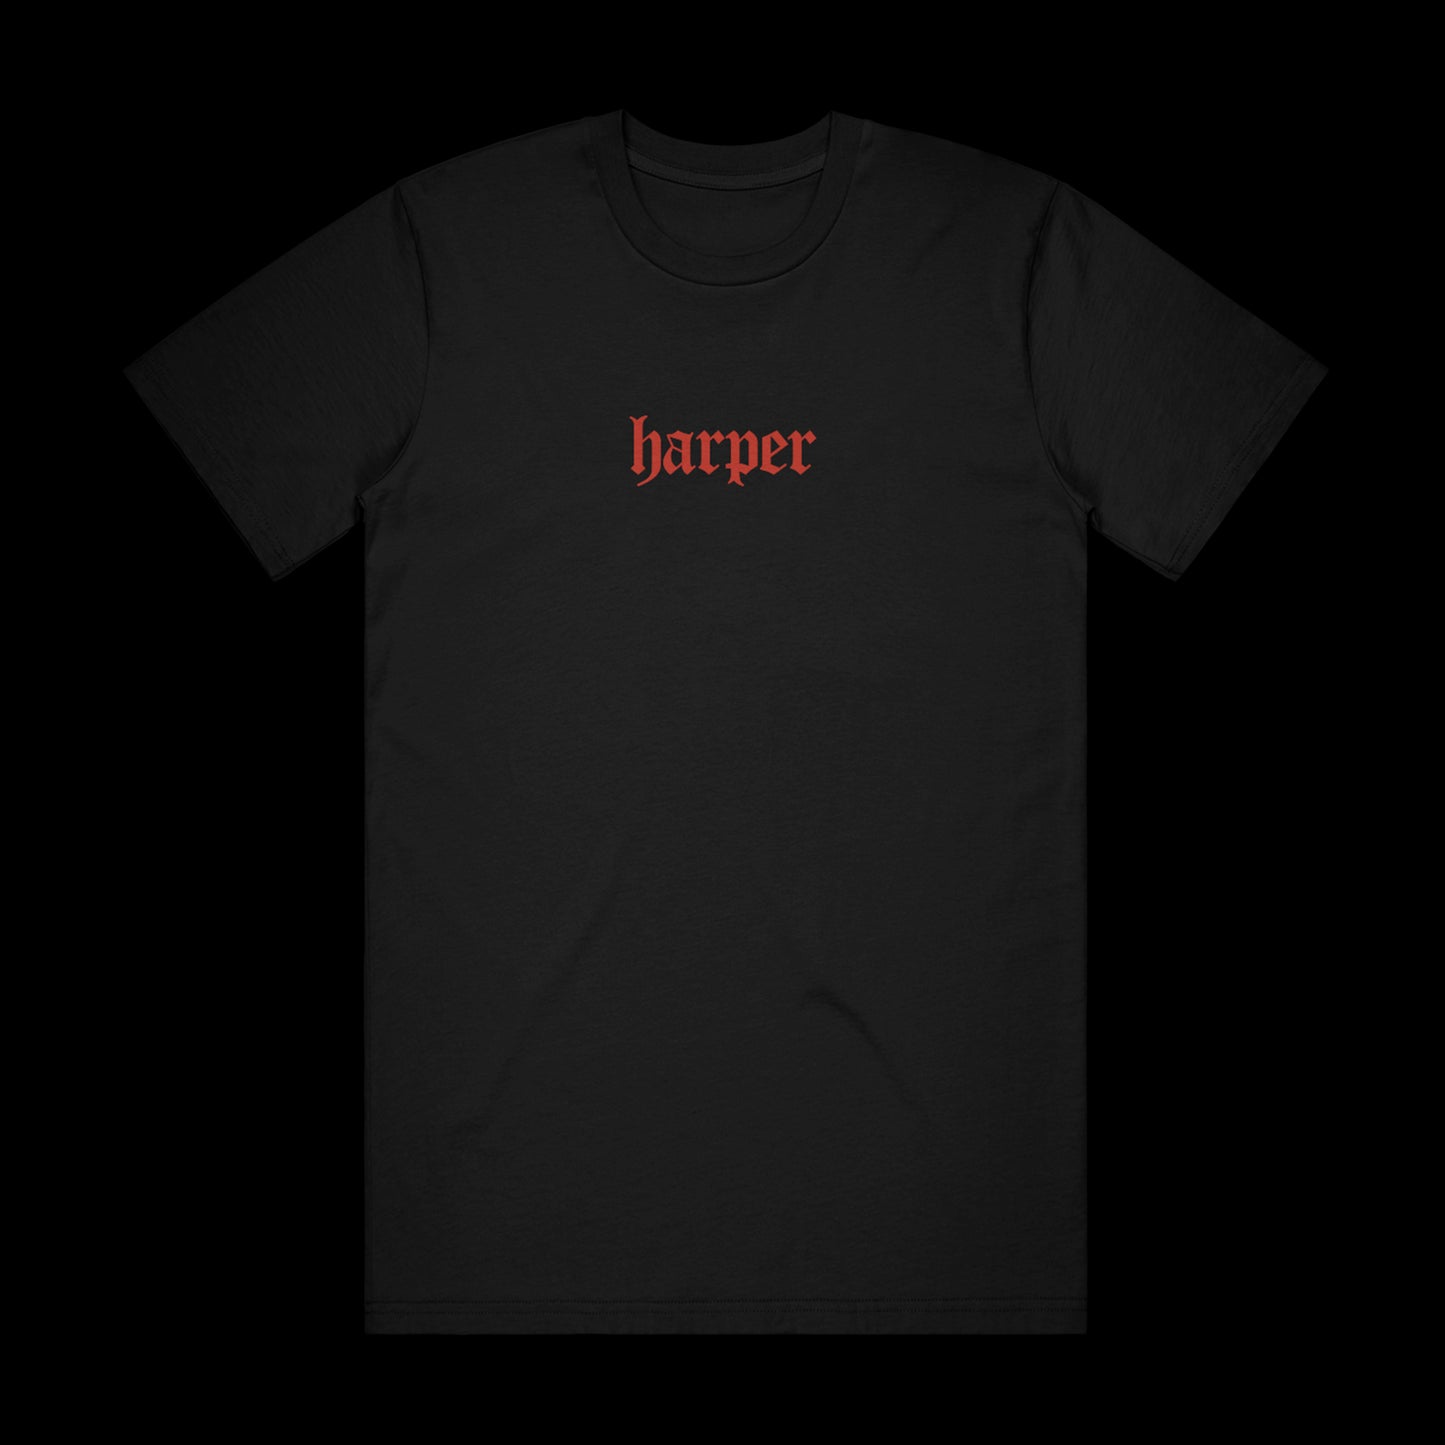 HARPER - STAINED GLASS T-SHIRT BLACK